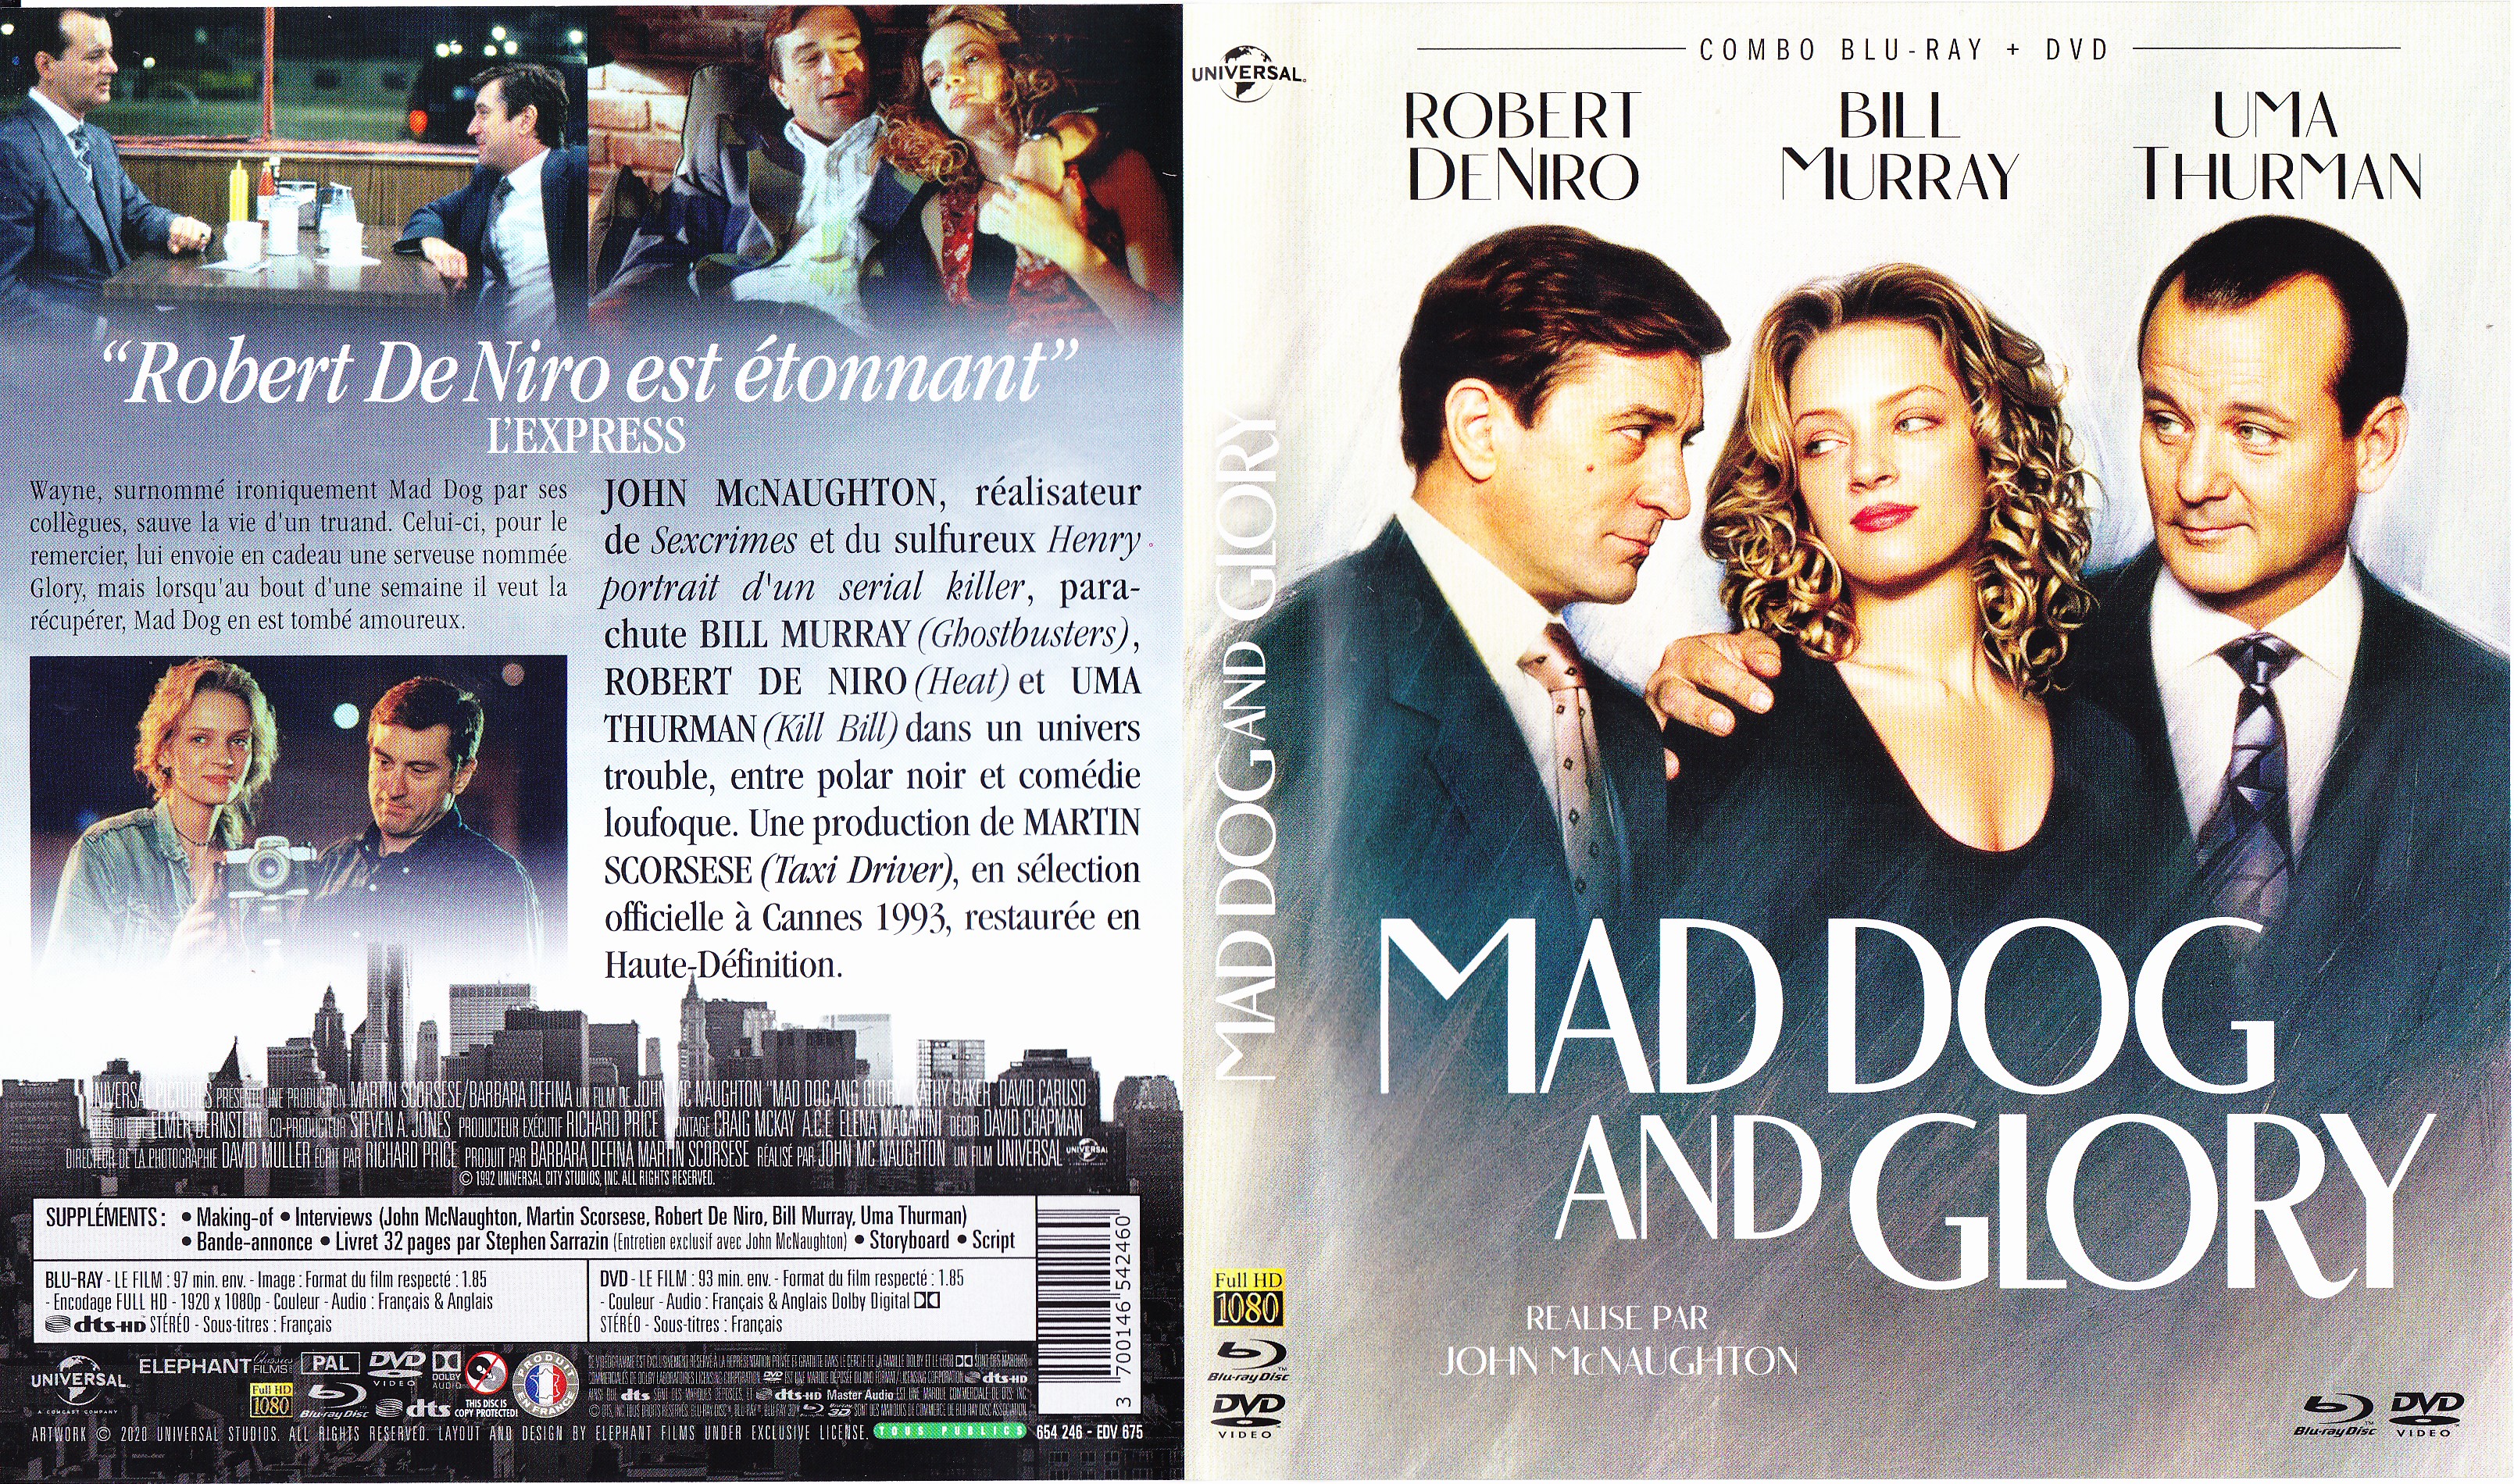 Jaquette DVD Mad dog and glory (BLU-RAY)